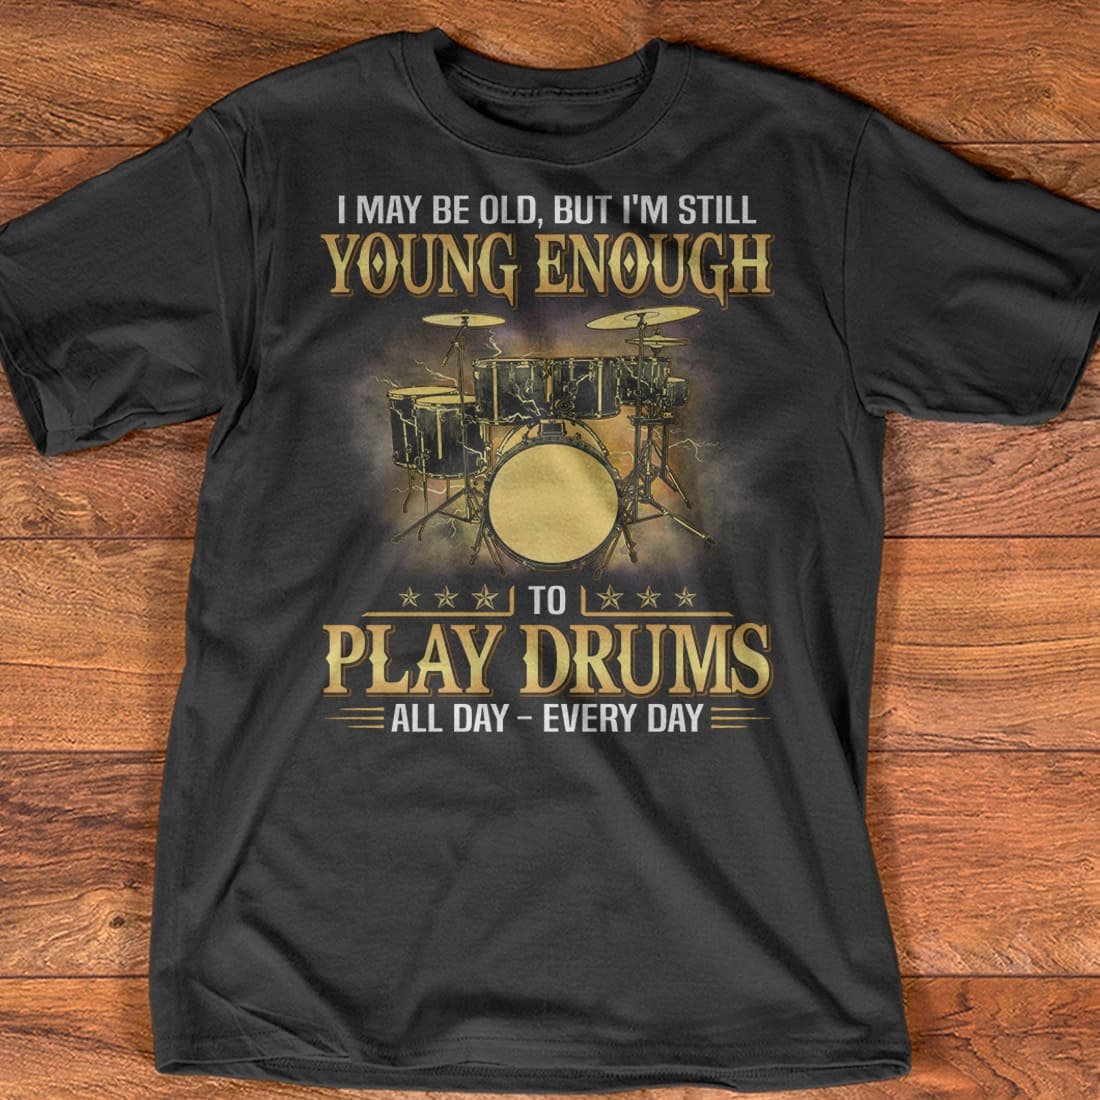 I may be old, but I'm still young enough to play drums all day - T-shirt for drummers, drum the instrument